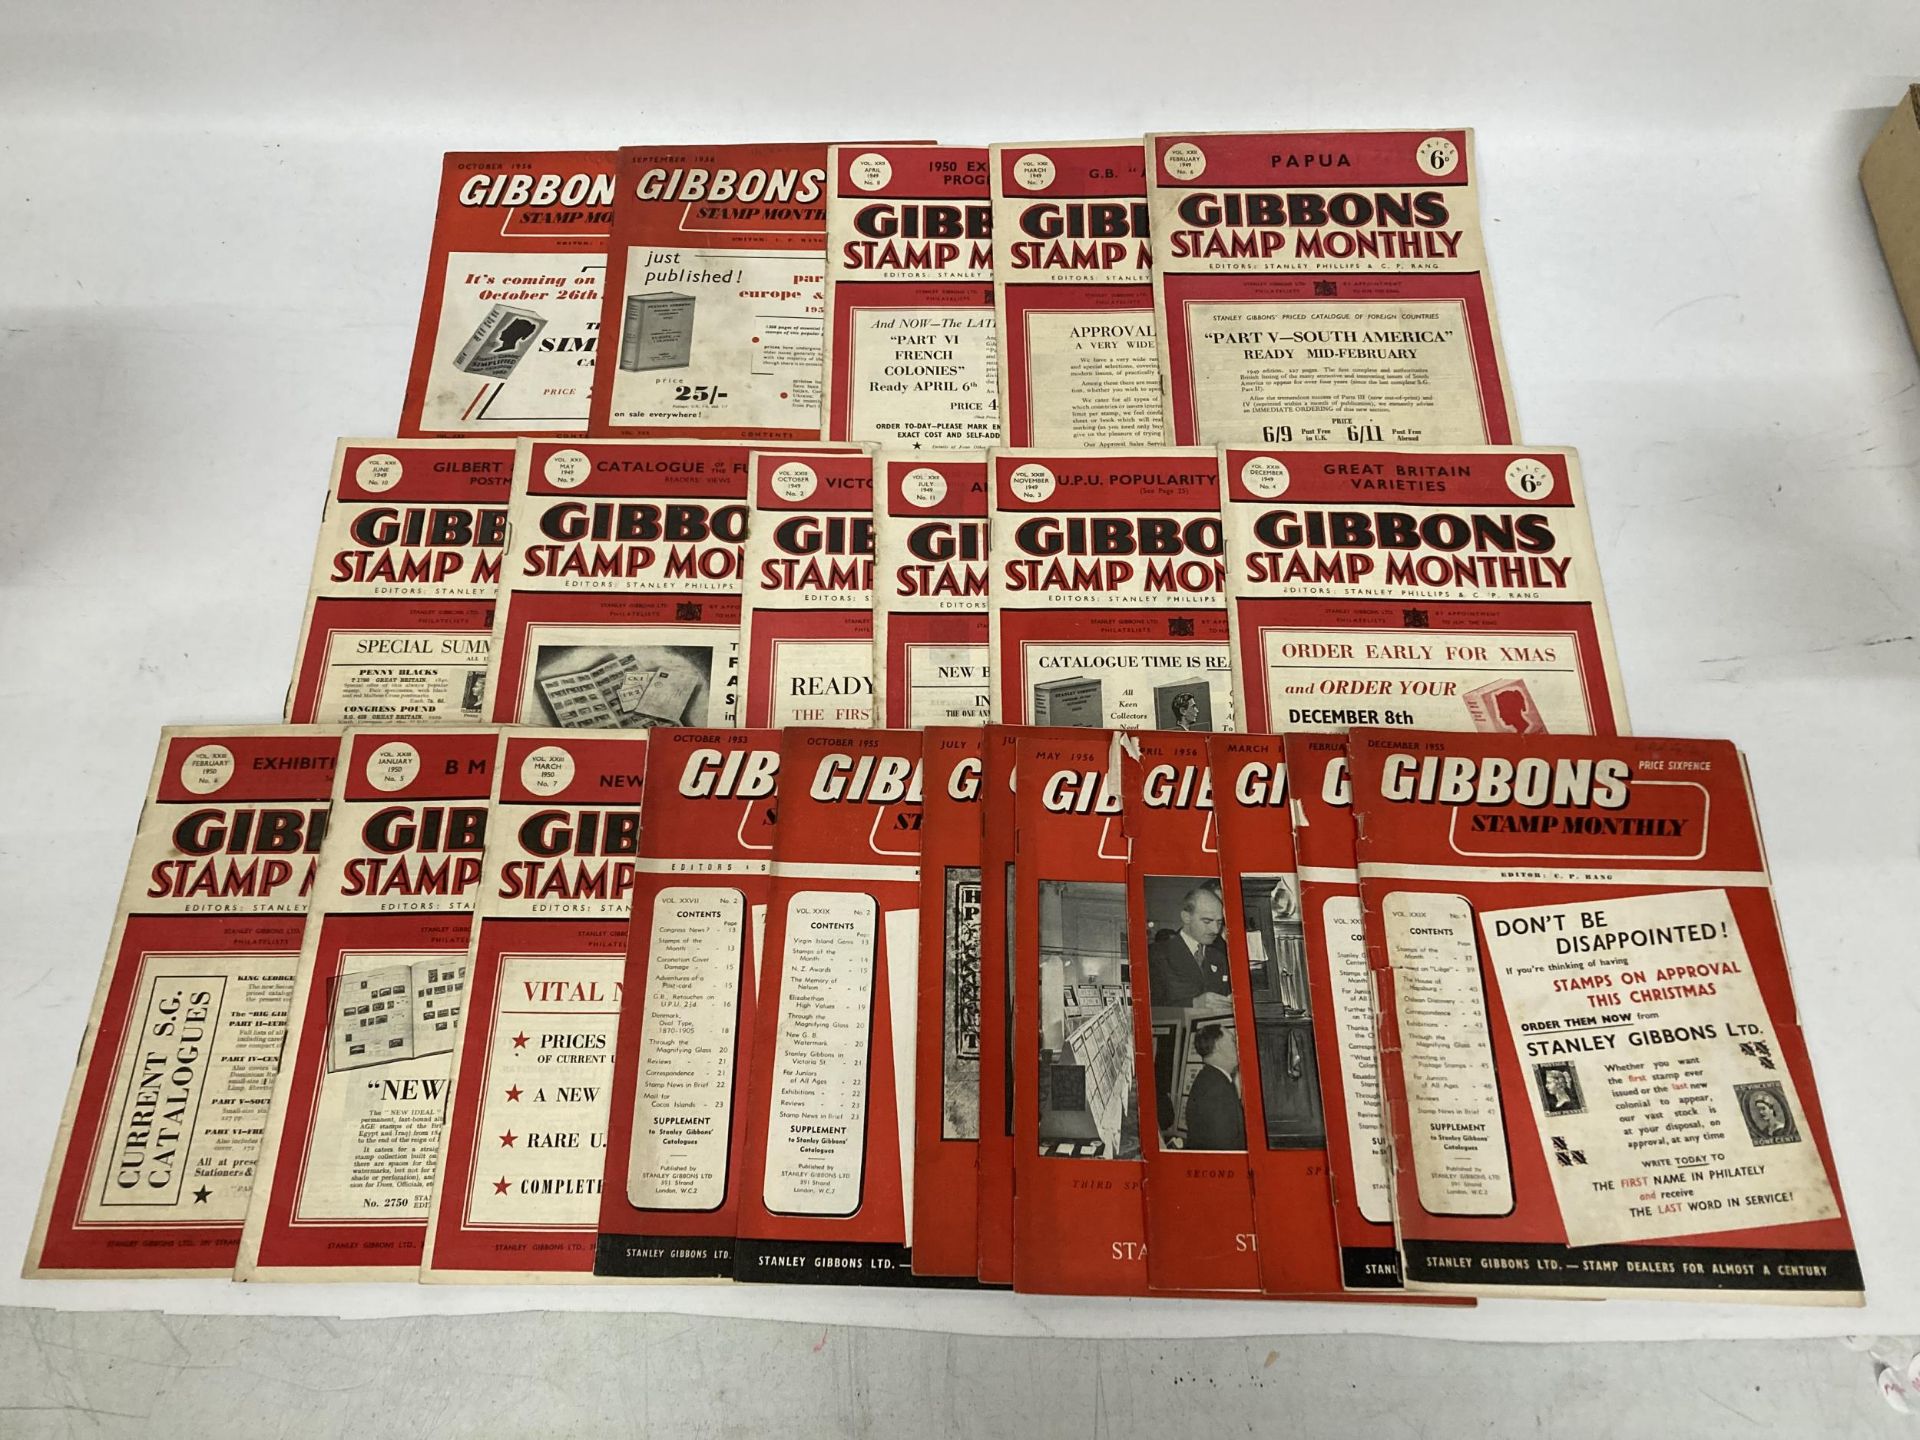 A QUANTITY OF GIBBONS STAMP MONTHLY 1949 - 1956 COLLECTION OF 24 PHILATELIC MAGAZINES IN USED